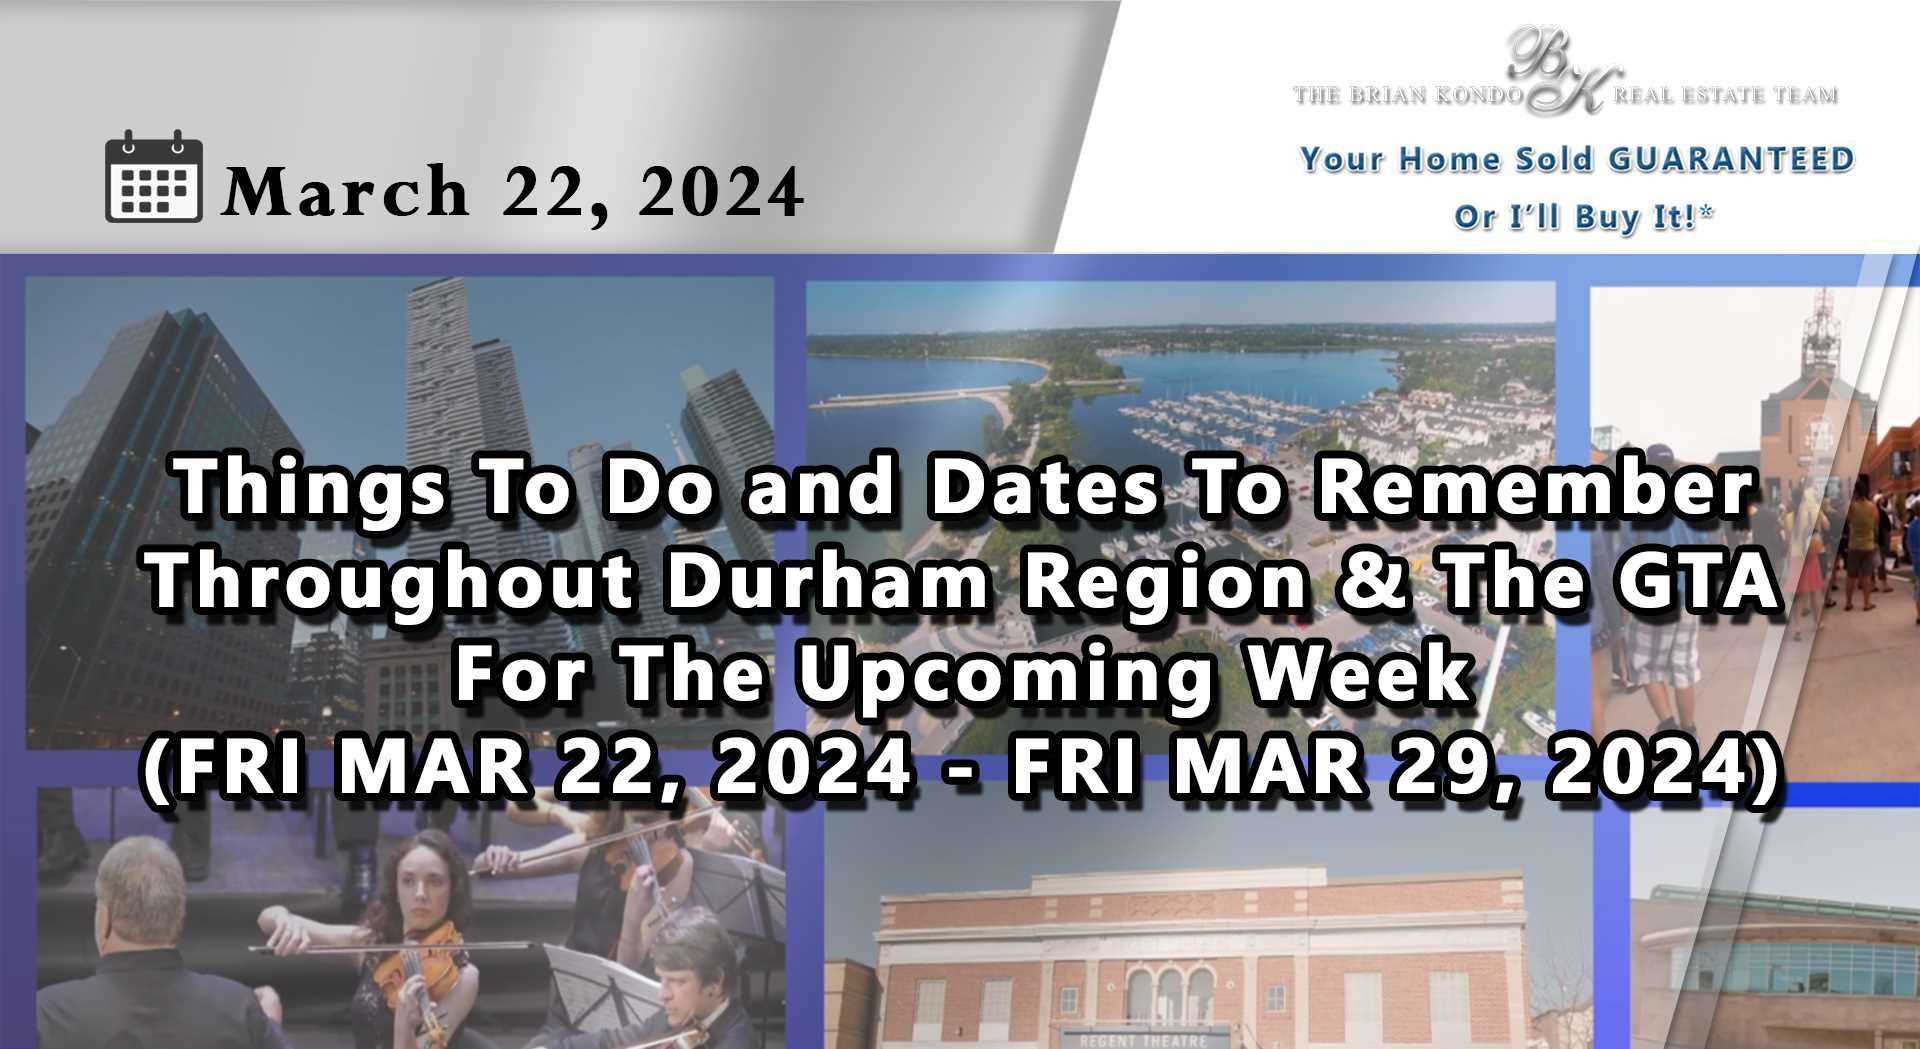 Things To Do and Dates To Remember Throughout Durham Region GTA For The Upcoming Week (FRI MAR 22, 2024 - FRI MAR 29, 2024) 